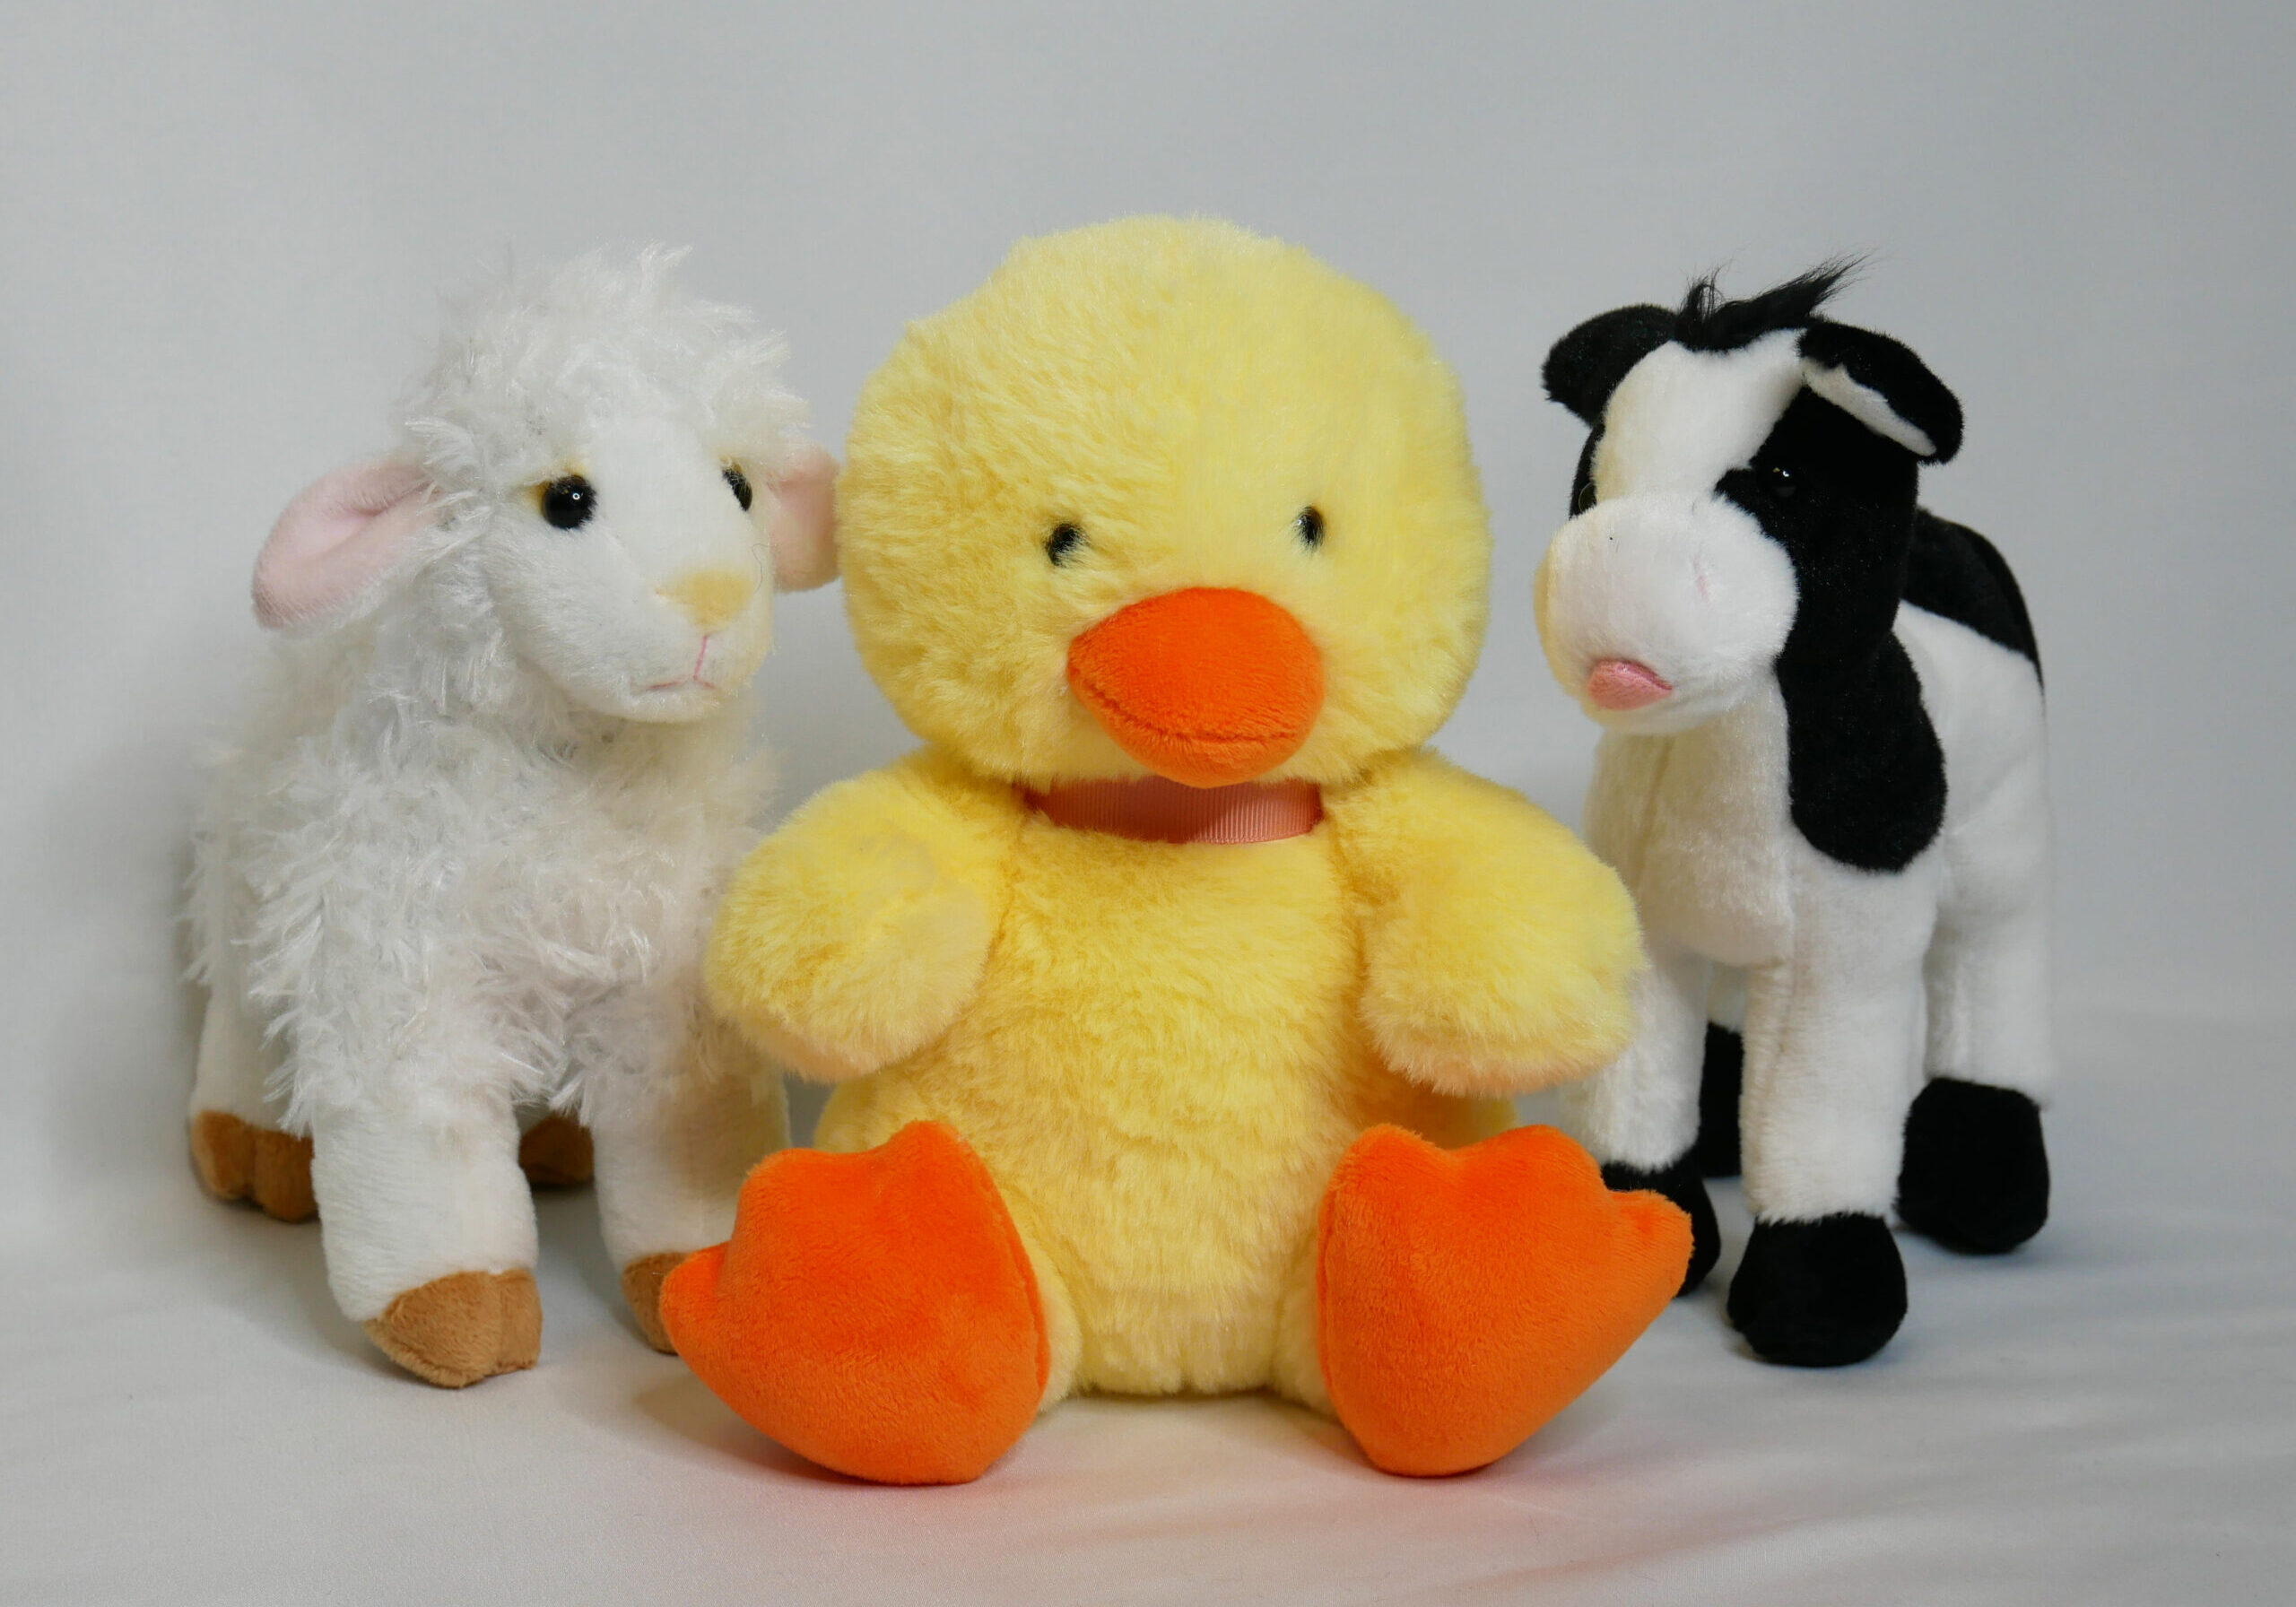 Custom Made Plush Farm Stuffed Animals (Lamb, Duck, Cow) Sold Wholesale for Non-Profit Fundraisers and Retail Sales - By Freemiums Capital Designs